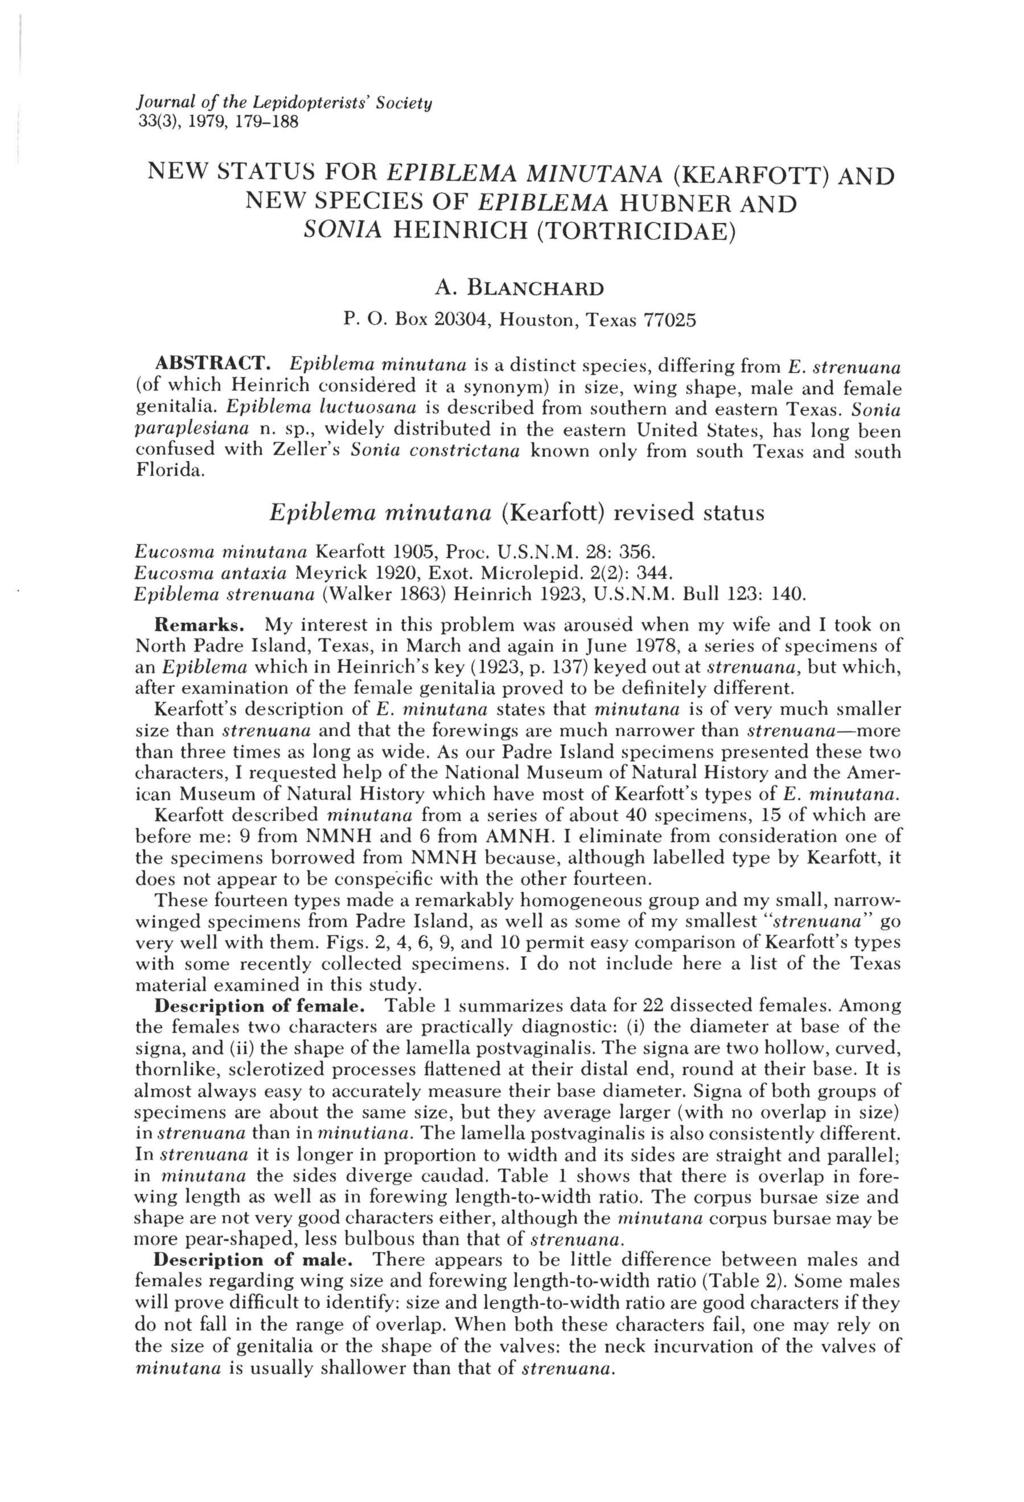 Journal of the Lepidopterists' Society 33(3), 1979, 179-188 NEW STATUS FOR EPIBLEMA MINUTANA (KEARFOTT) AND NEW SPECIES OF EPIBLEMA HUBNER AND SONIA HEINRICH (TORTRICIDAE) A.